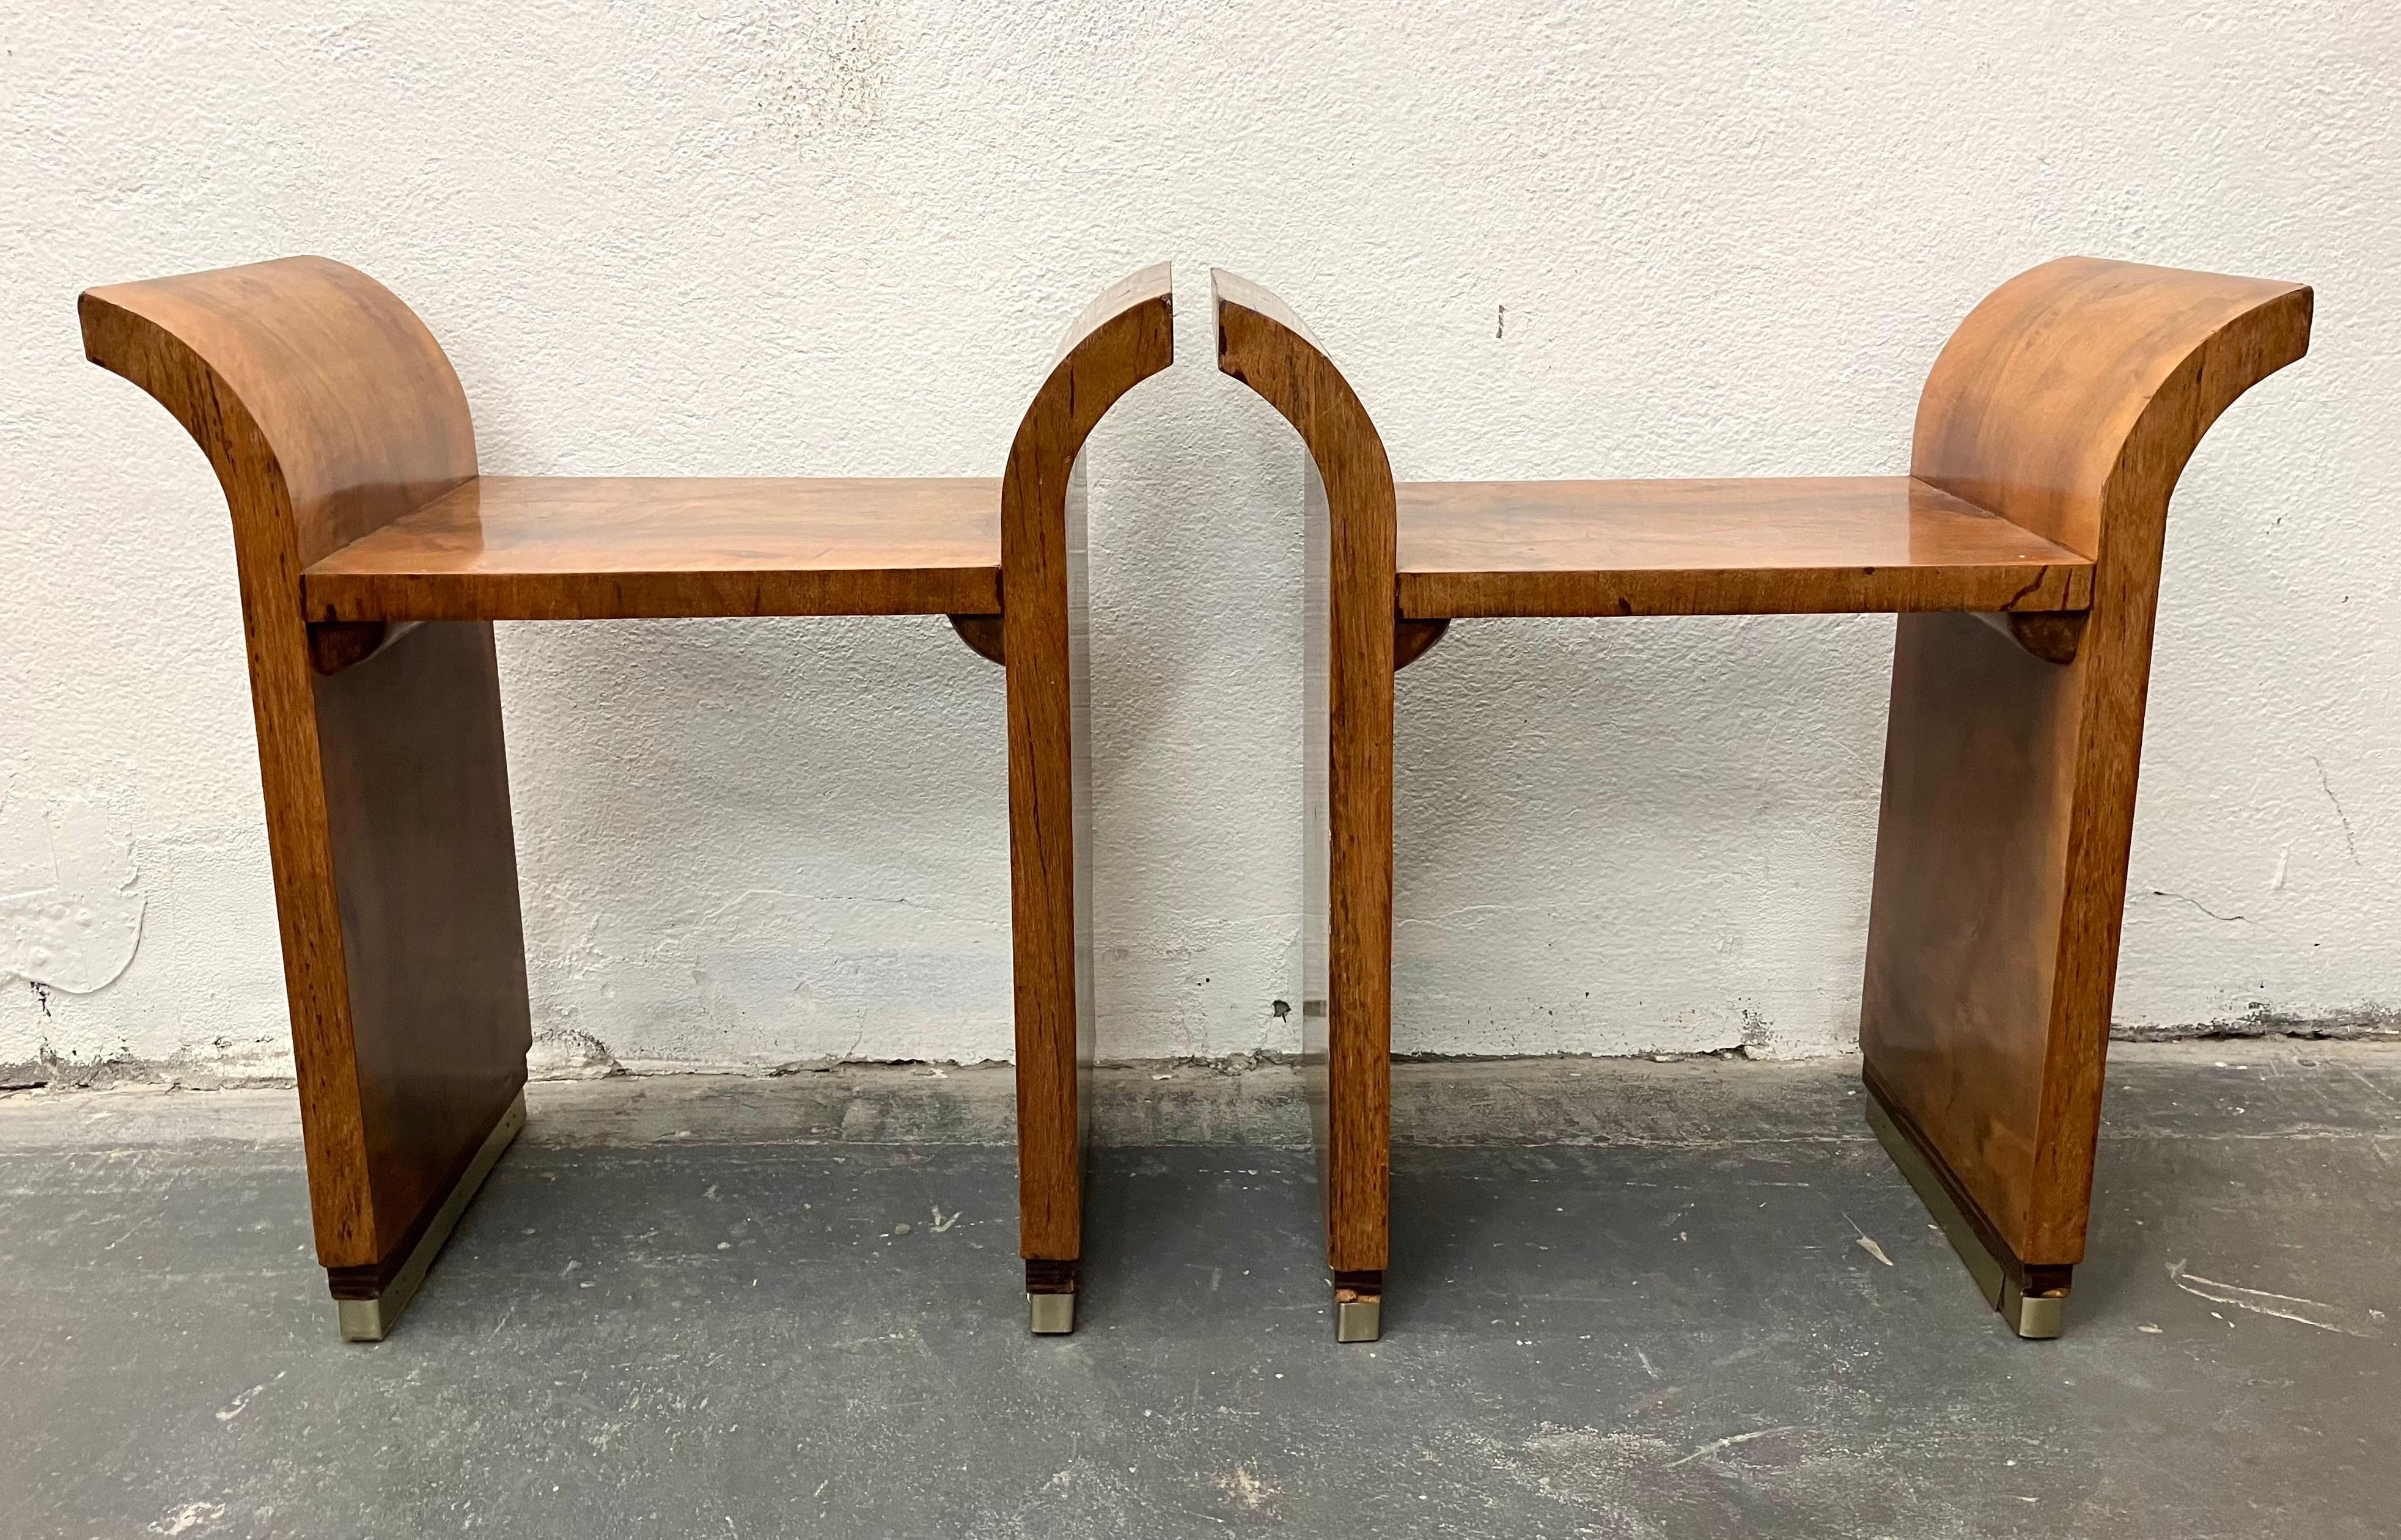 Modernist period French Art Deco curule-form stools in figured walnut with aluminum and Macassar Ebony banded feet. Unmarked but in the style of Pierre Chareau or Jacques Adnet.